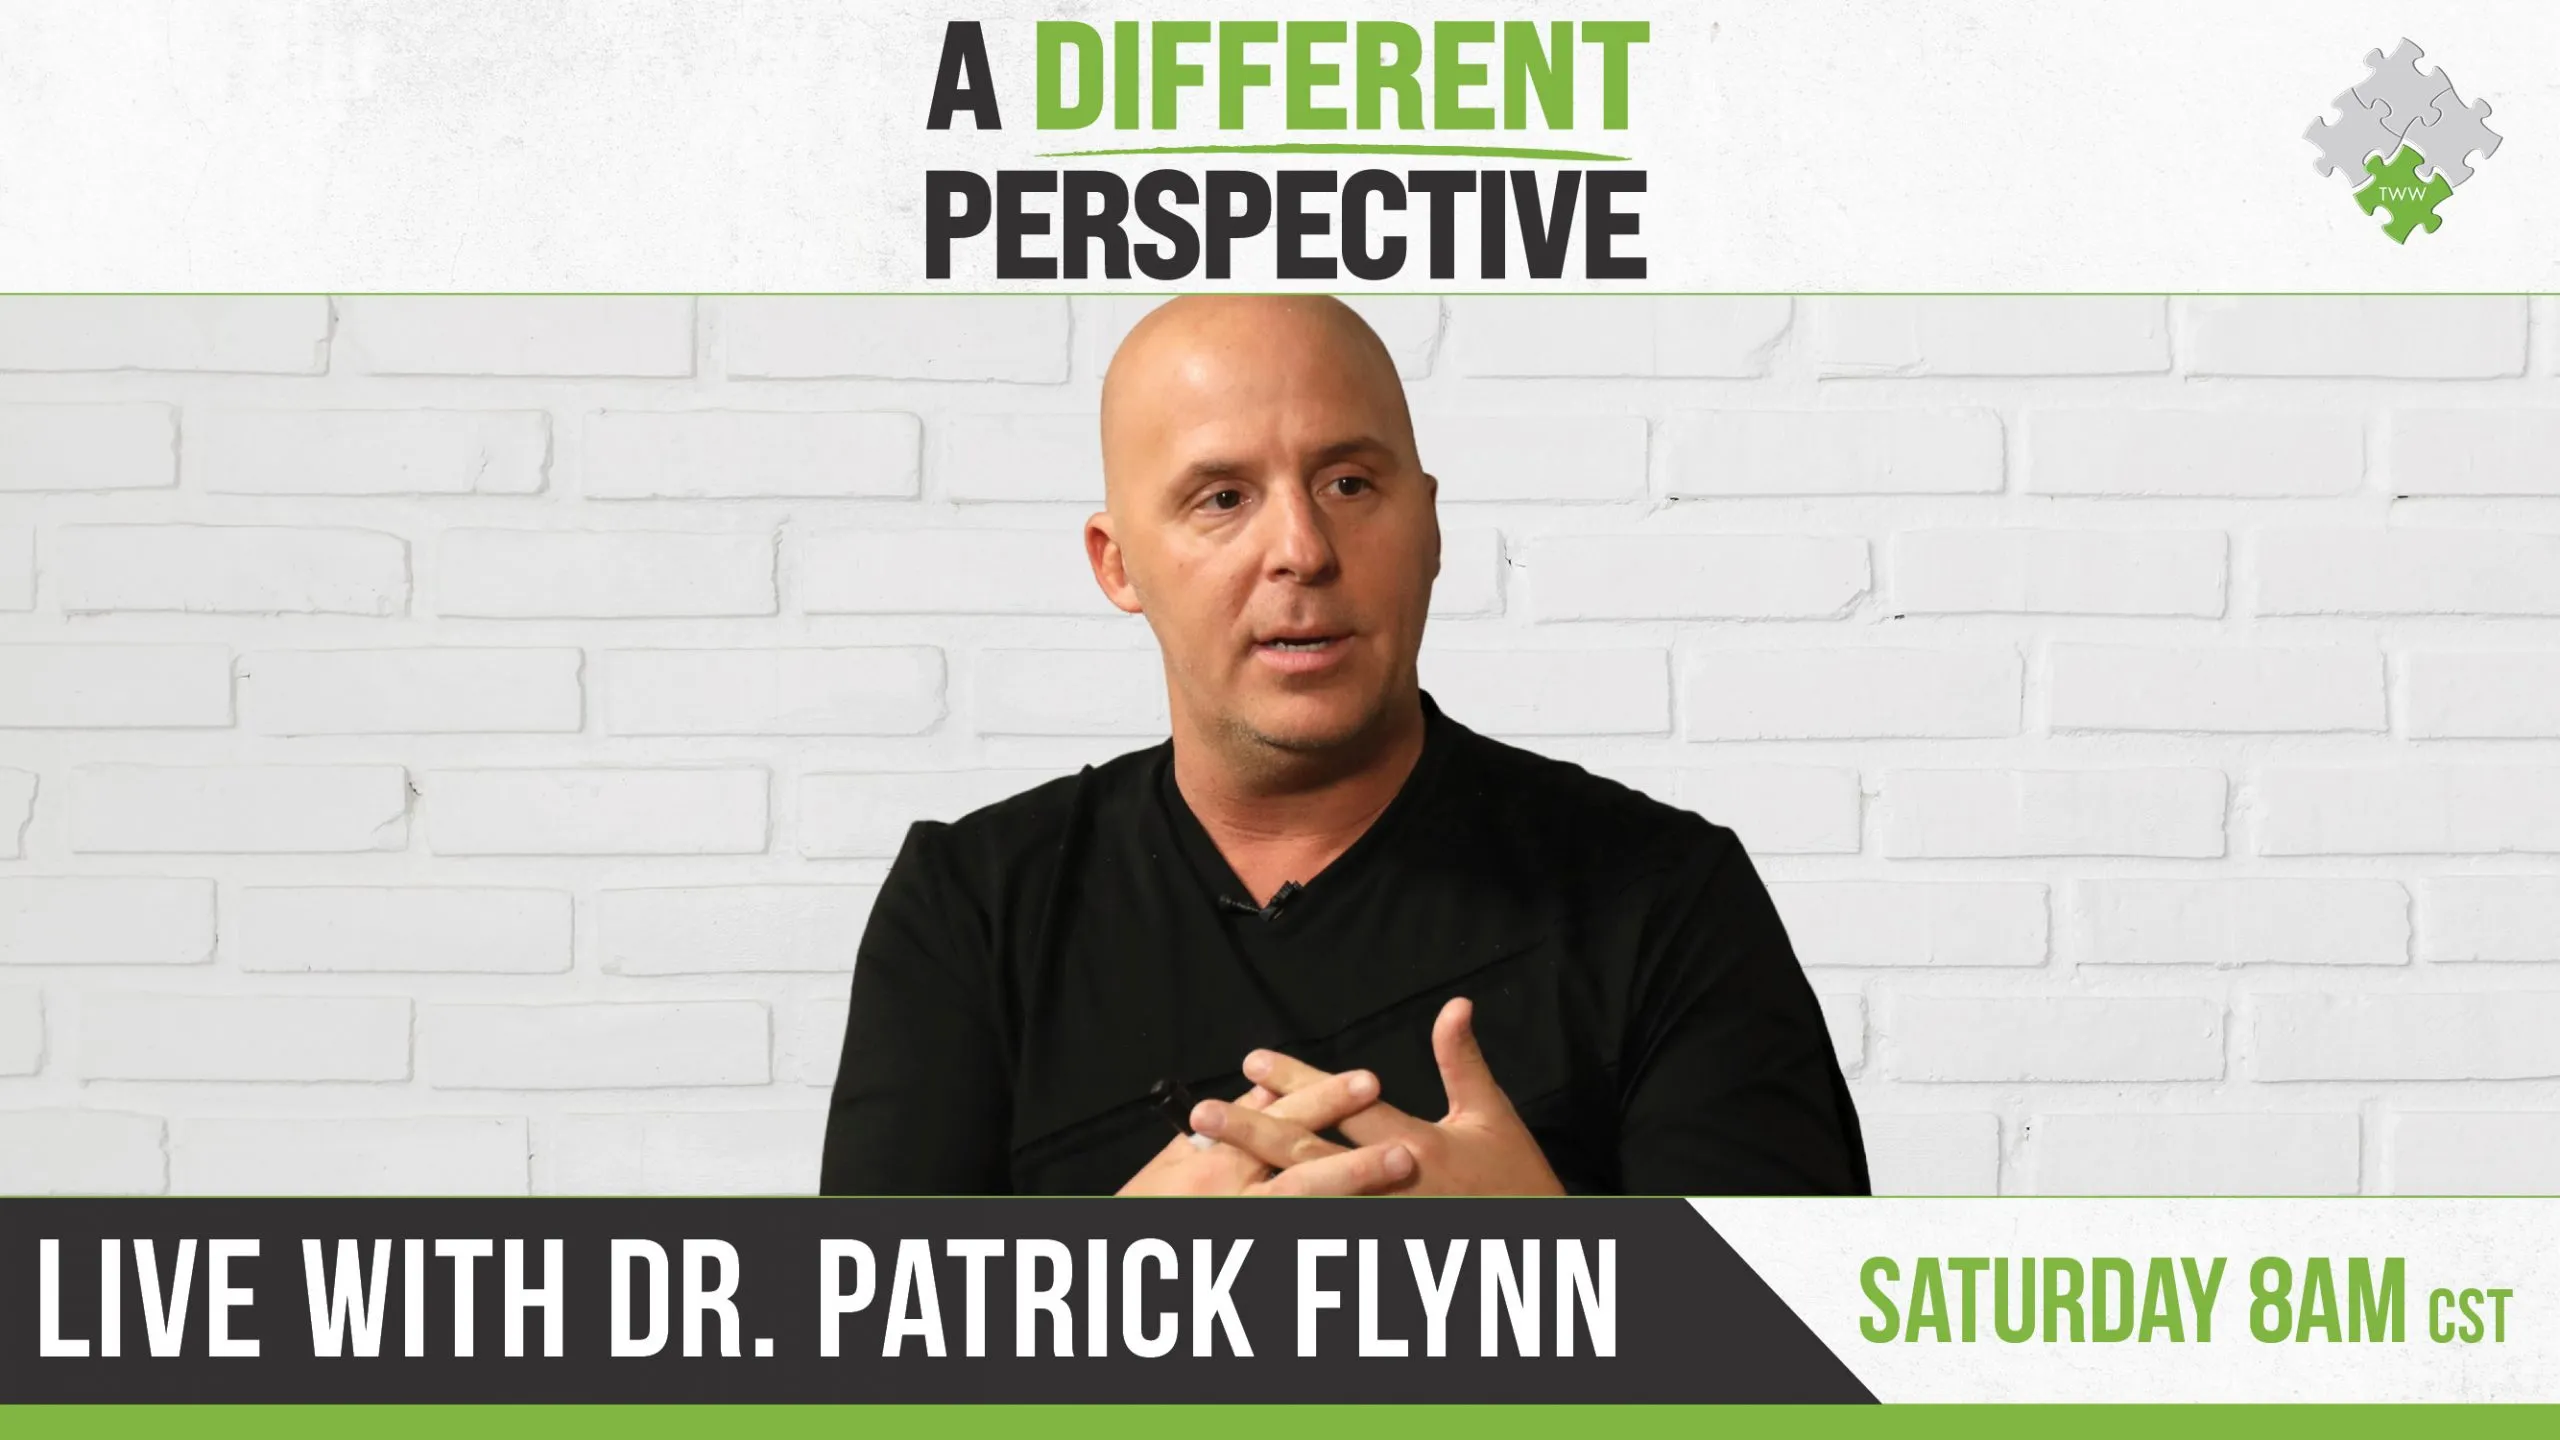 10.31.21 – “A Different Perspective with Dr. Patrick Flynn” Recap